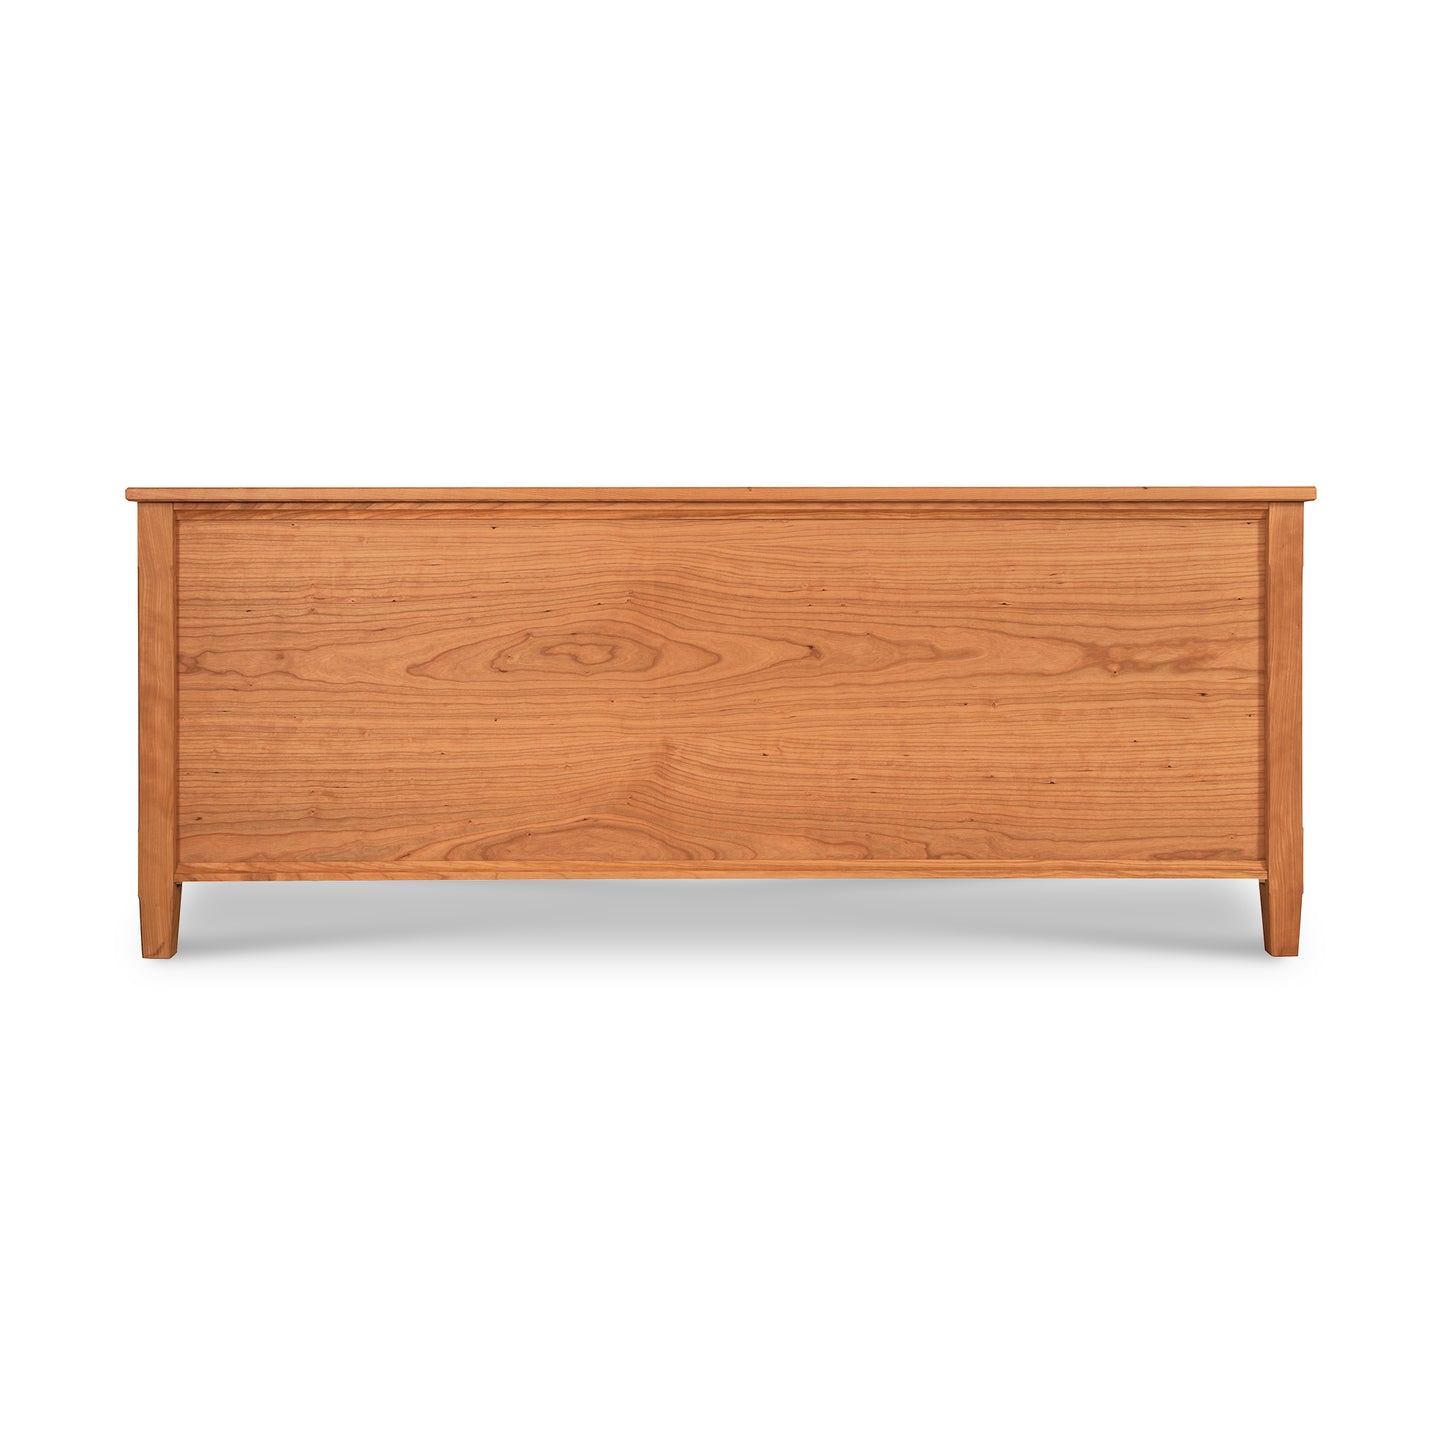 A Vermont Shaker Blanket Chest from Maple Corner Woodworks with a flat top and curved legs, isolated on a white background. The chest has a natural wood grain finish and is made from sustainably harvested woods.